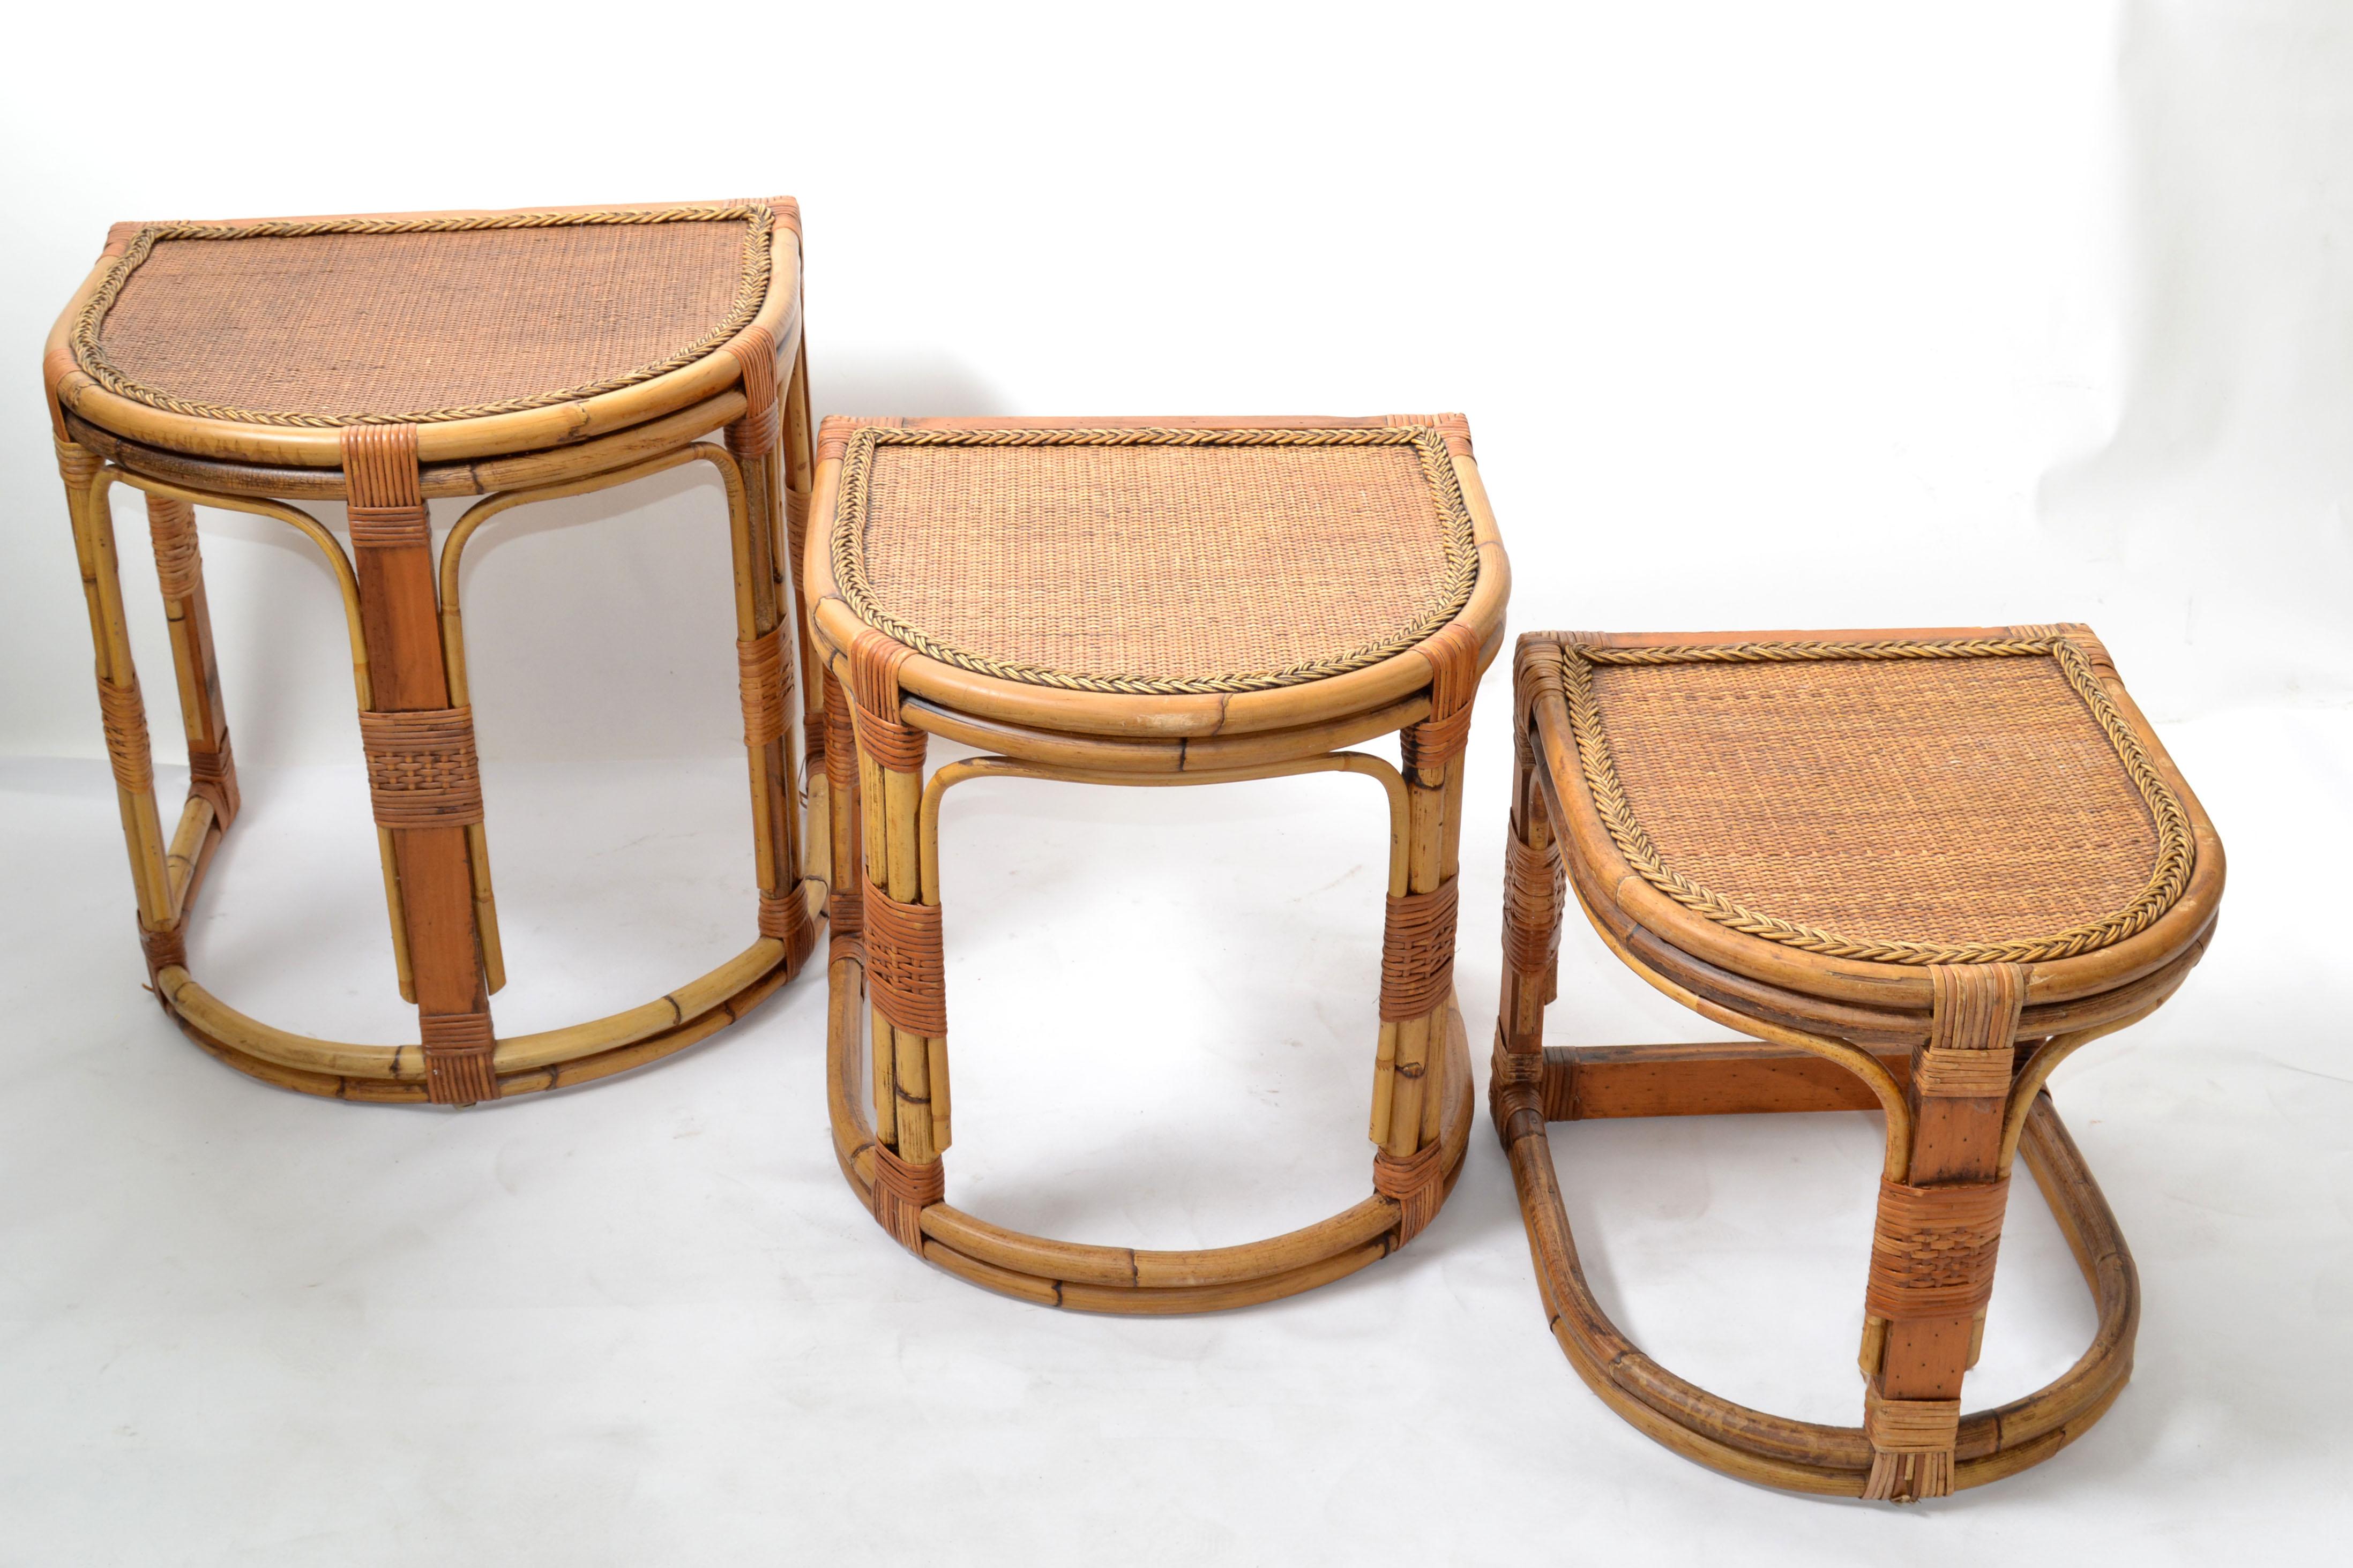 Semi-Circle Bamboo & Cane Nesting Tables / Stacking Tables Handcrafted, Set of 3 For Sale 1